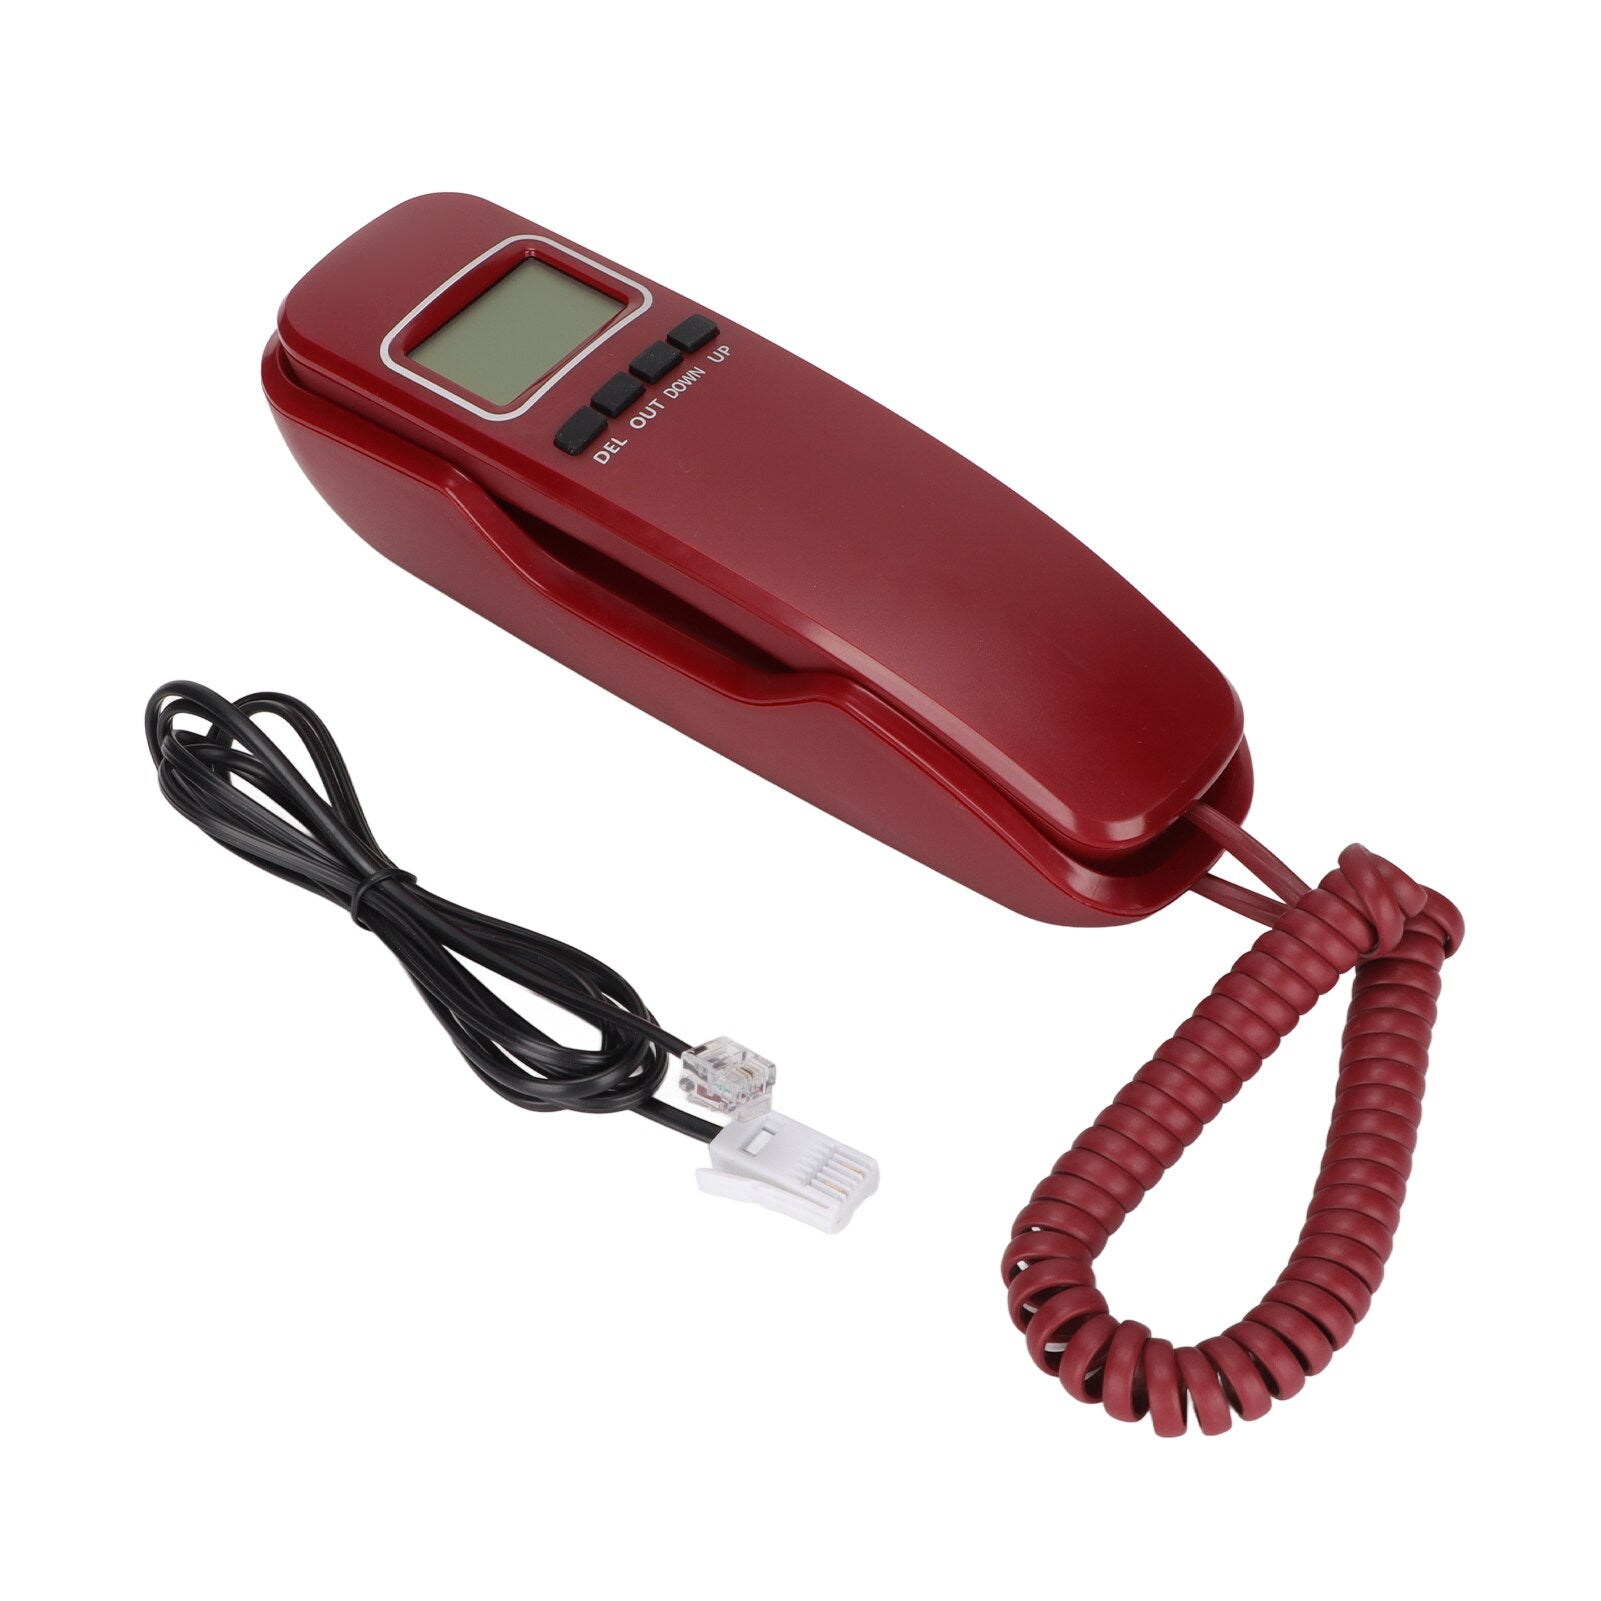 Corded Phone LCD Screen Landline Phone Adjustable Ringtones Wired Telephone With Redial And Calendar For Home Office